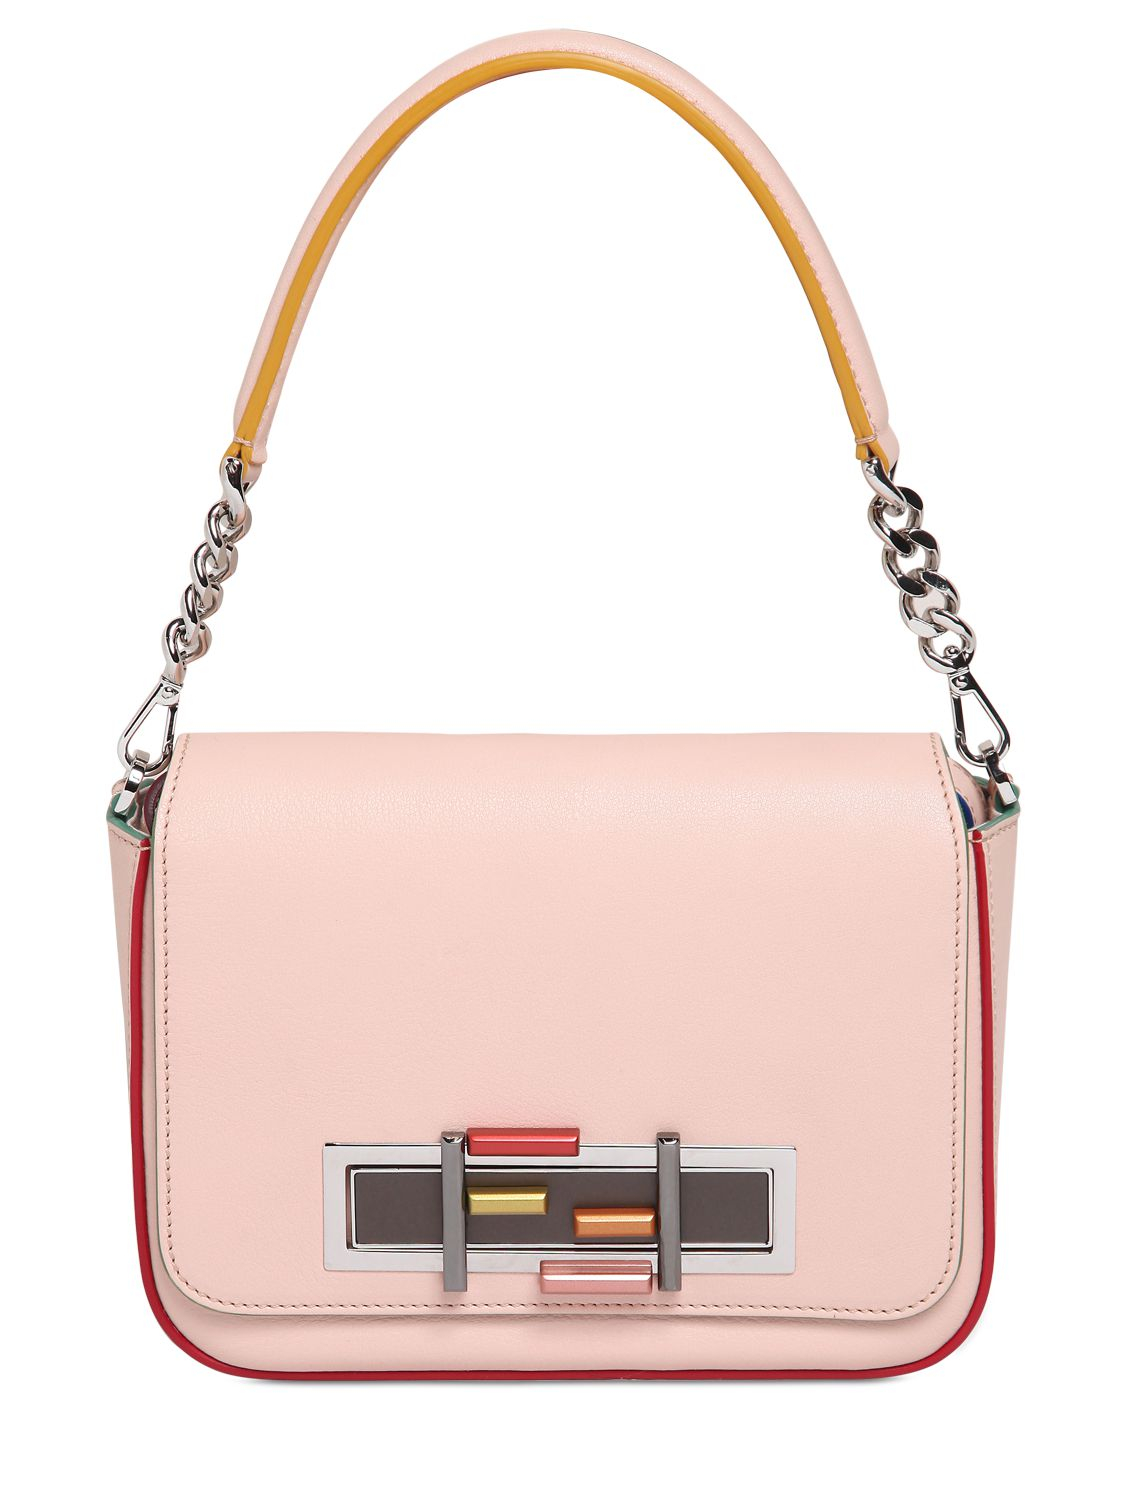 Lyst - Fendi 3 Baguette Chain Color Trim Leather Bag in Pink